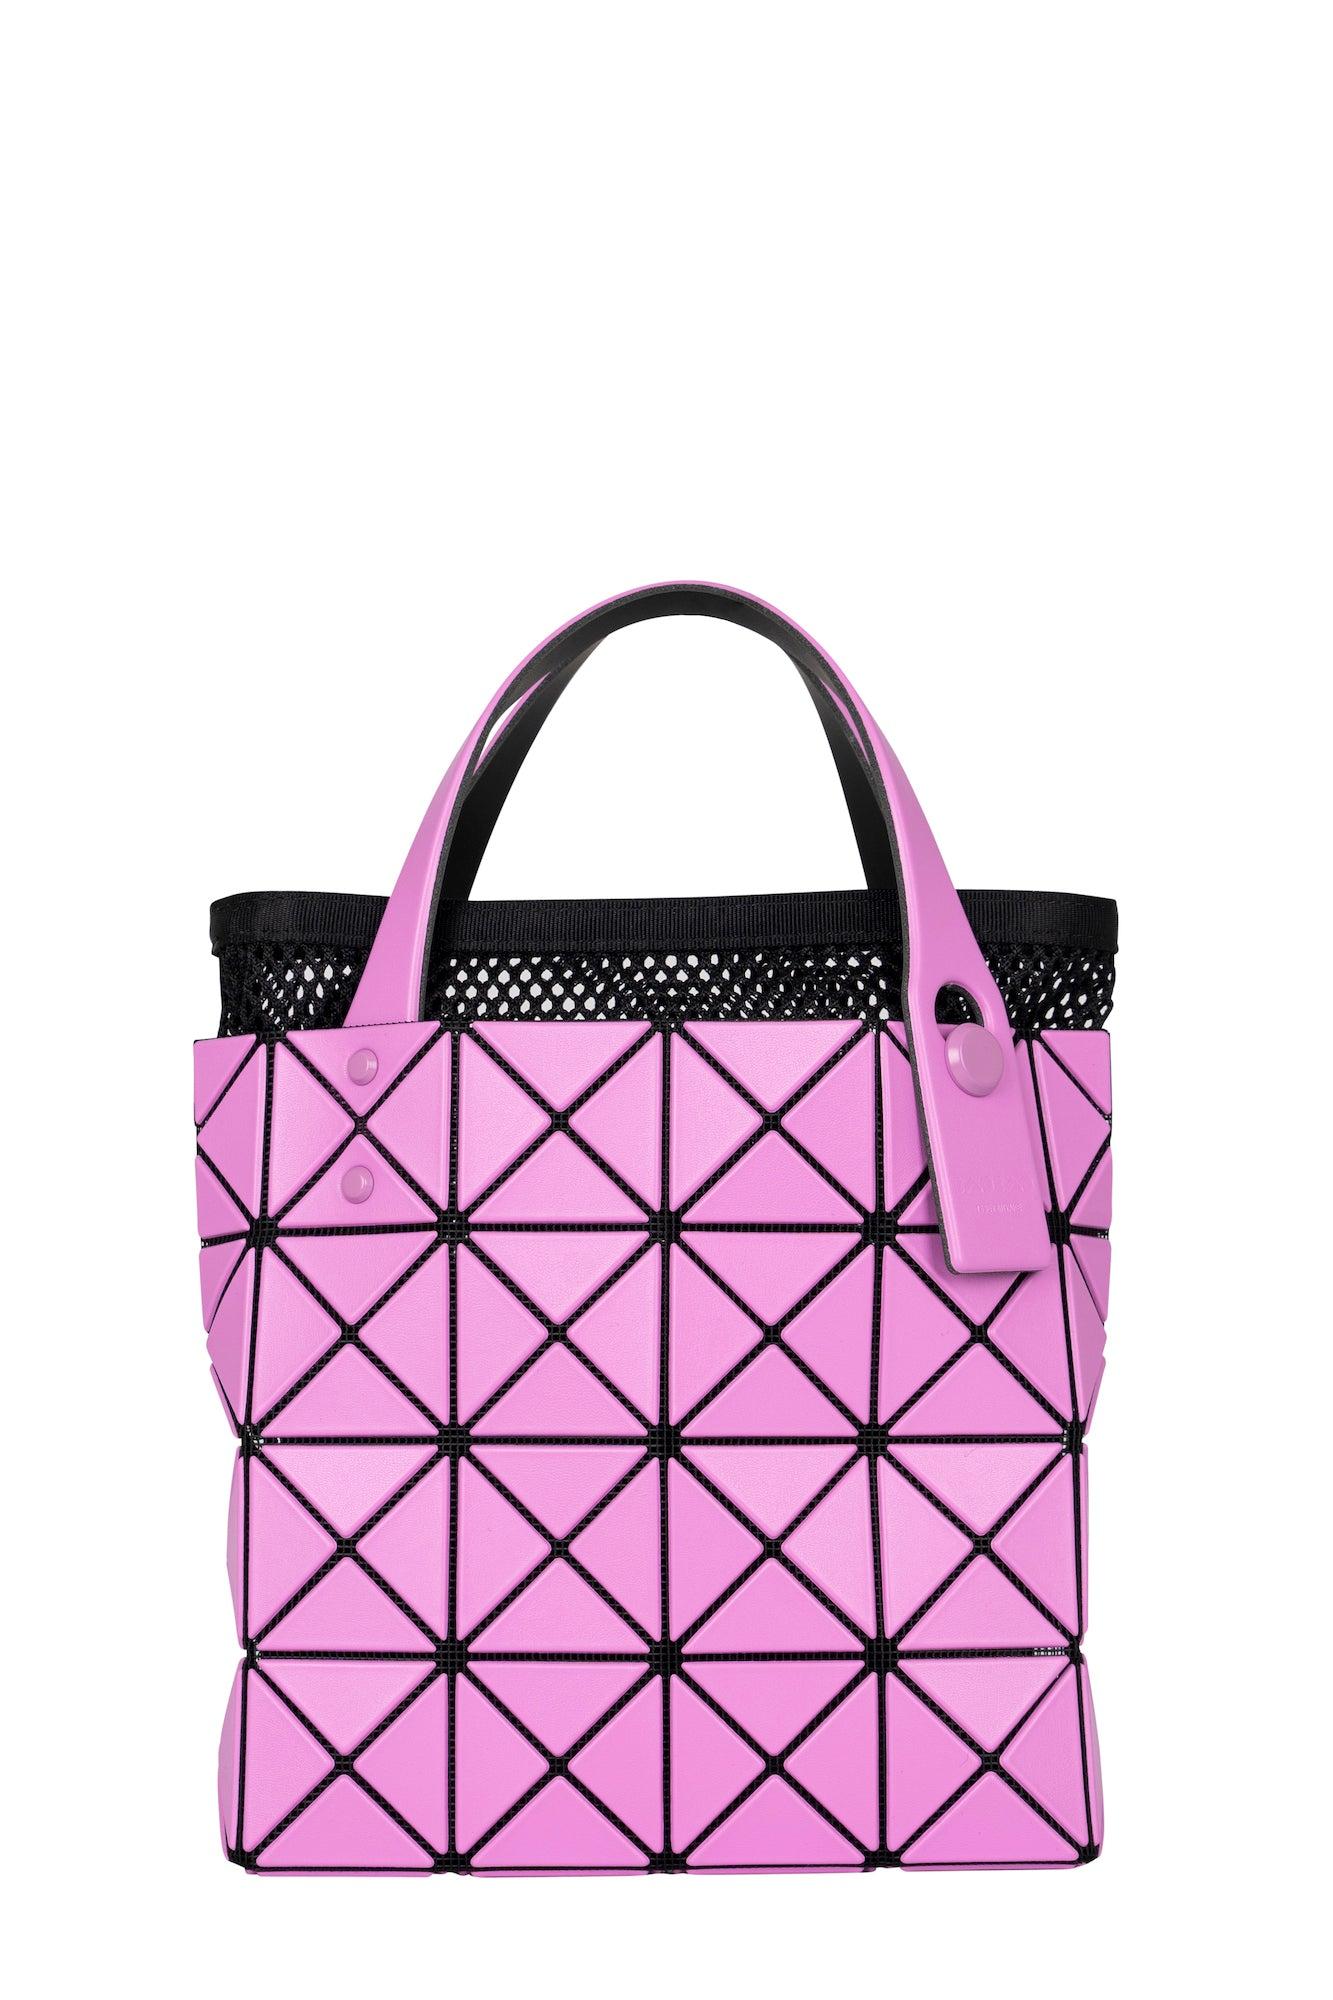 Bao Bao Issey Miyake Lucent Boxy In Rose Pink in Purple | Lyst